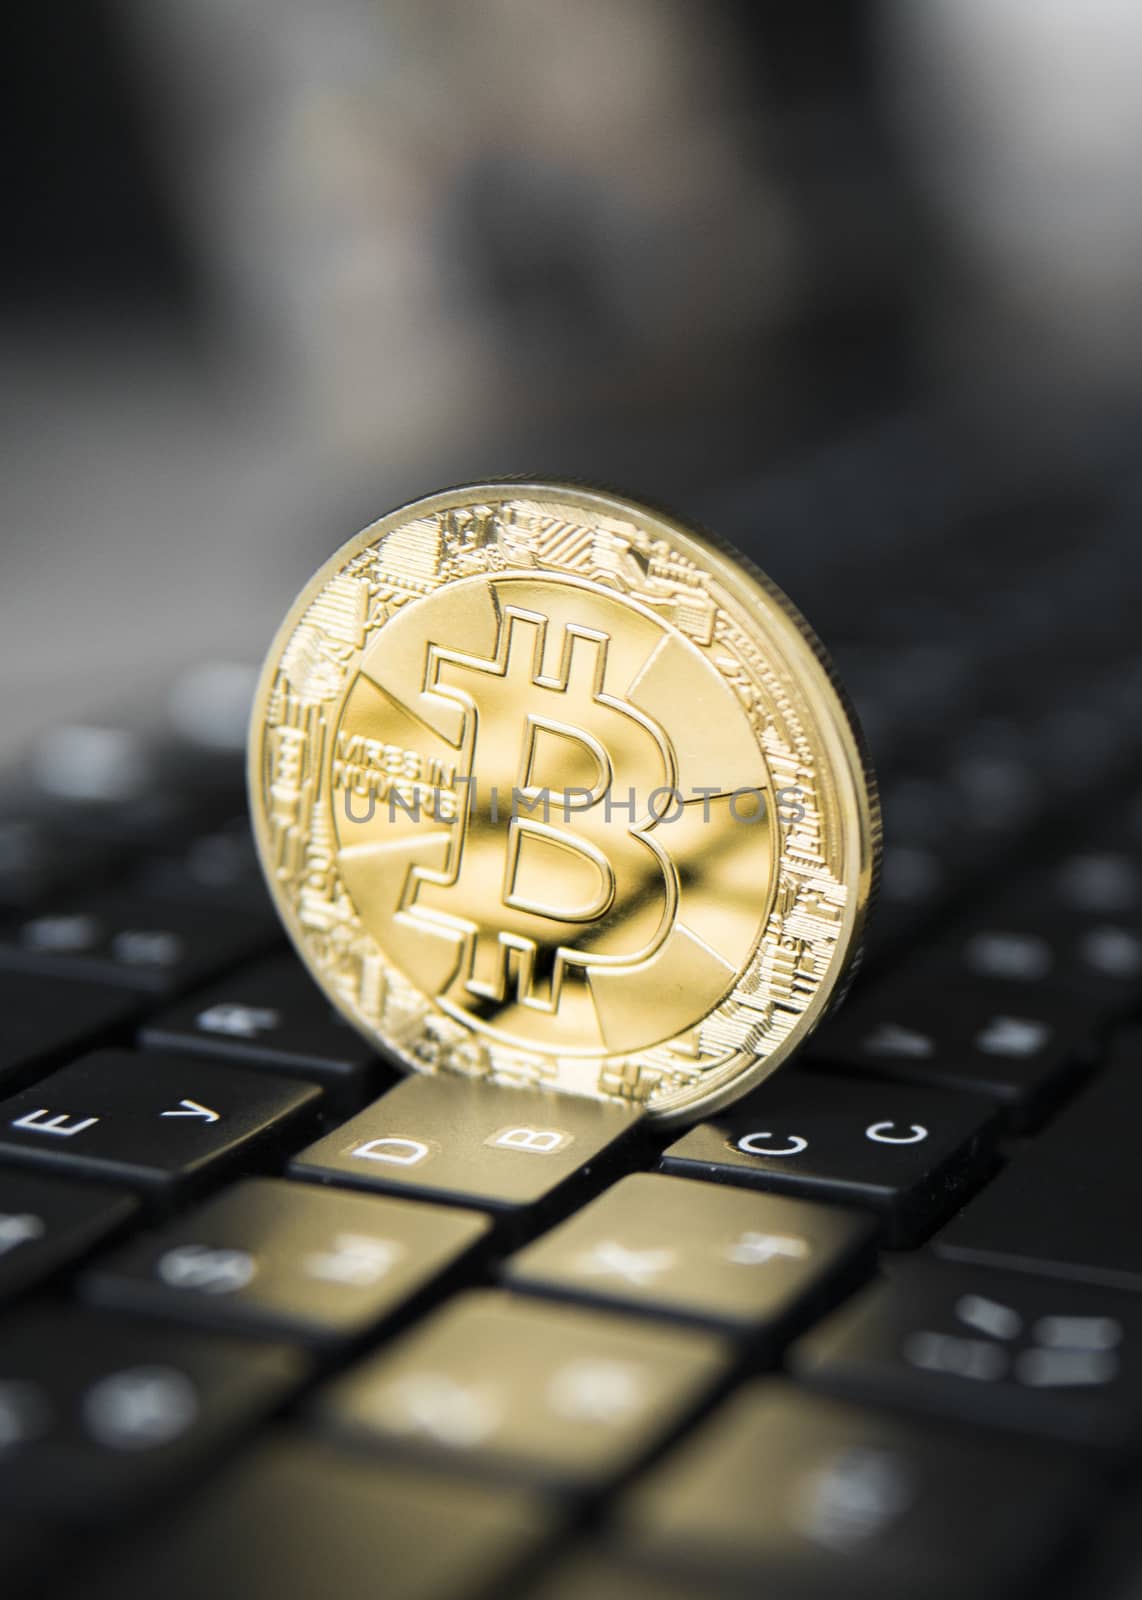 Golden bitcoin on a keyboard. Bitcoin crypto currency on a computer black keyboard. Digital currency. Virtual money. Metal coins of bitcoin. Bussiness, commercial, Exchange